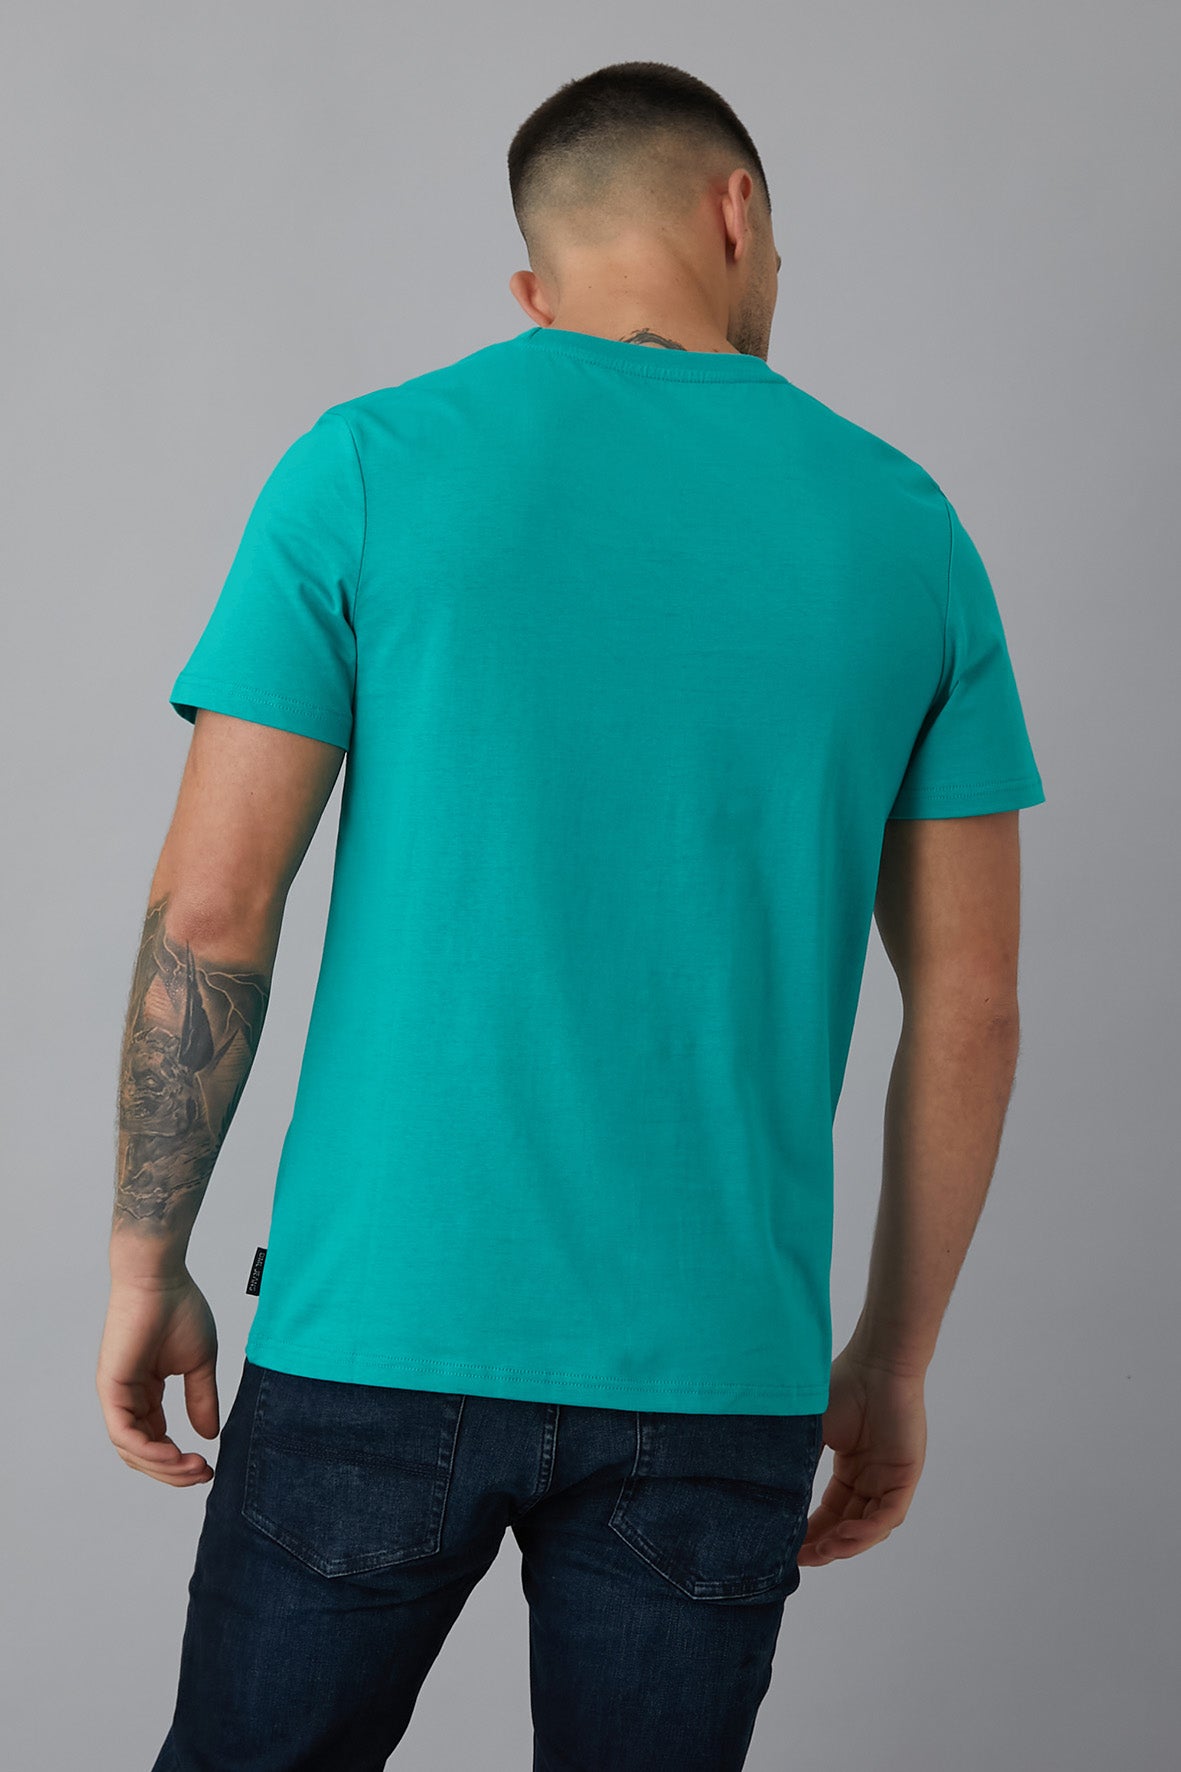 ARTICULATE Printed crew neck t-shirt in JADE - DML Jeans 